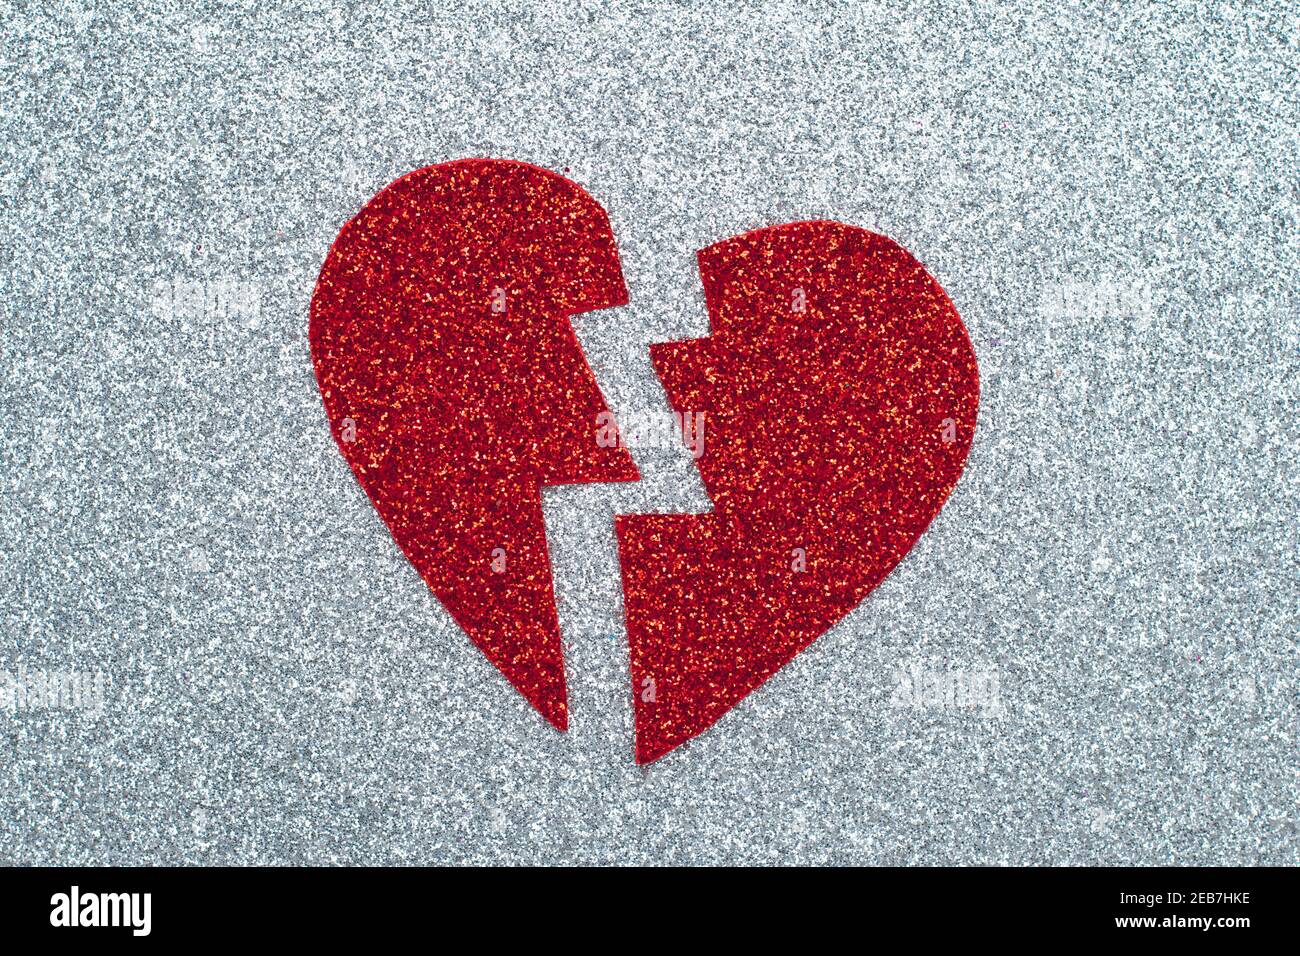 Broken red heart on gray glitter paper, a break up concept. Tinsel applique. A symbol of love, Valentine's Day, romantic feelings and emotions. Abstra Stock Photo